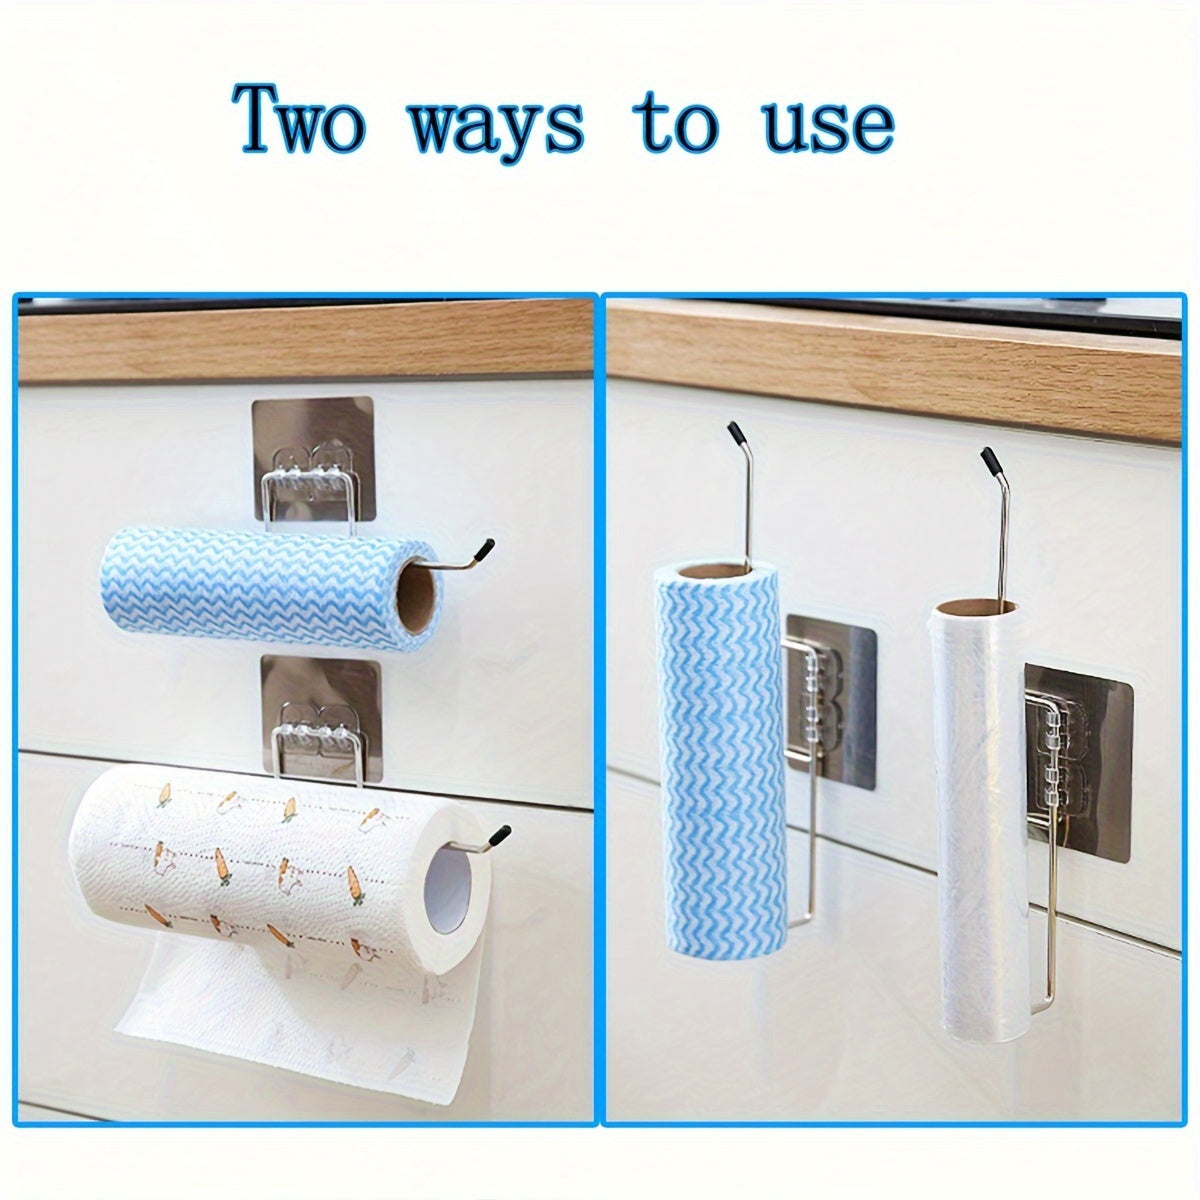 1pc Wall-mounted Punching-free Kitchen Paper Holder, Toilet Roll Paper Holder, Bathroom Paper Holder, Home Kitchen And Bathroom Accessories